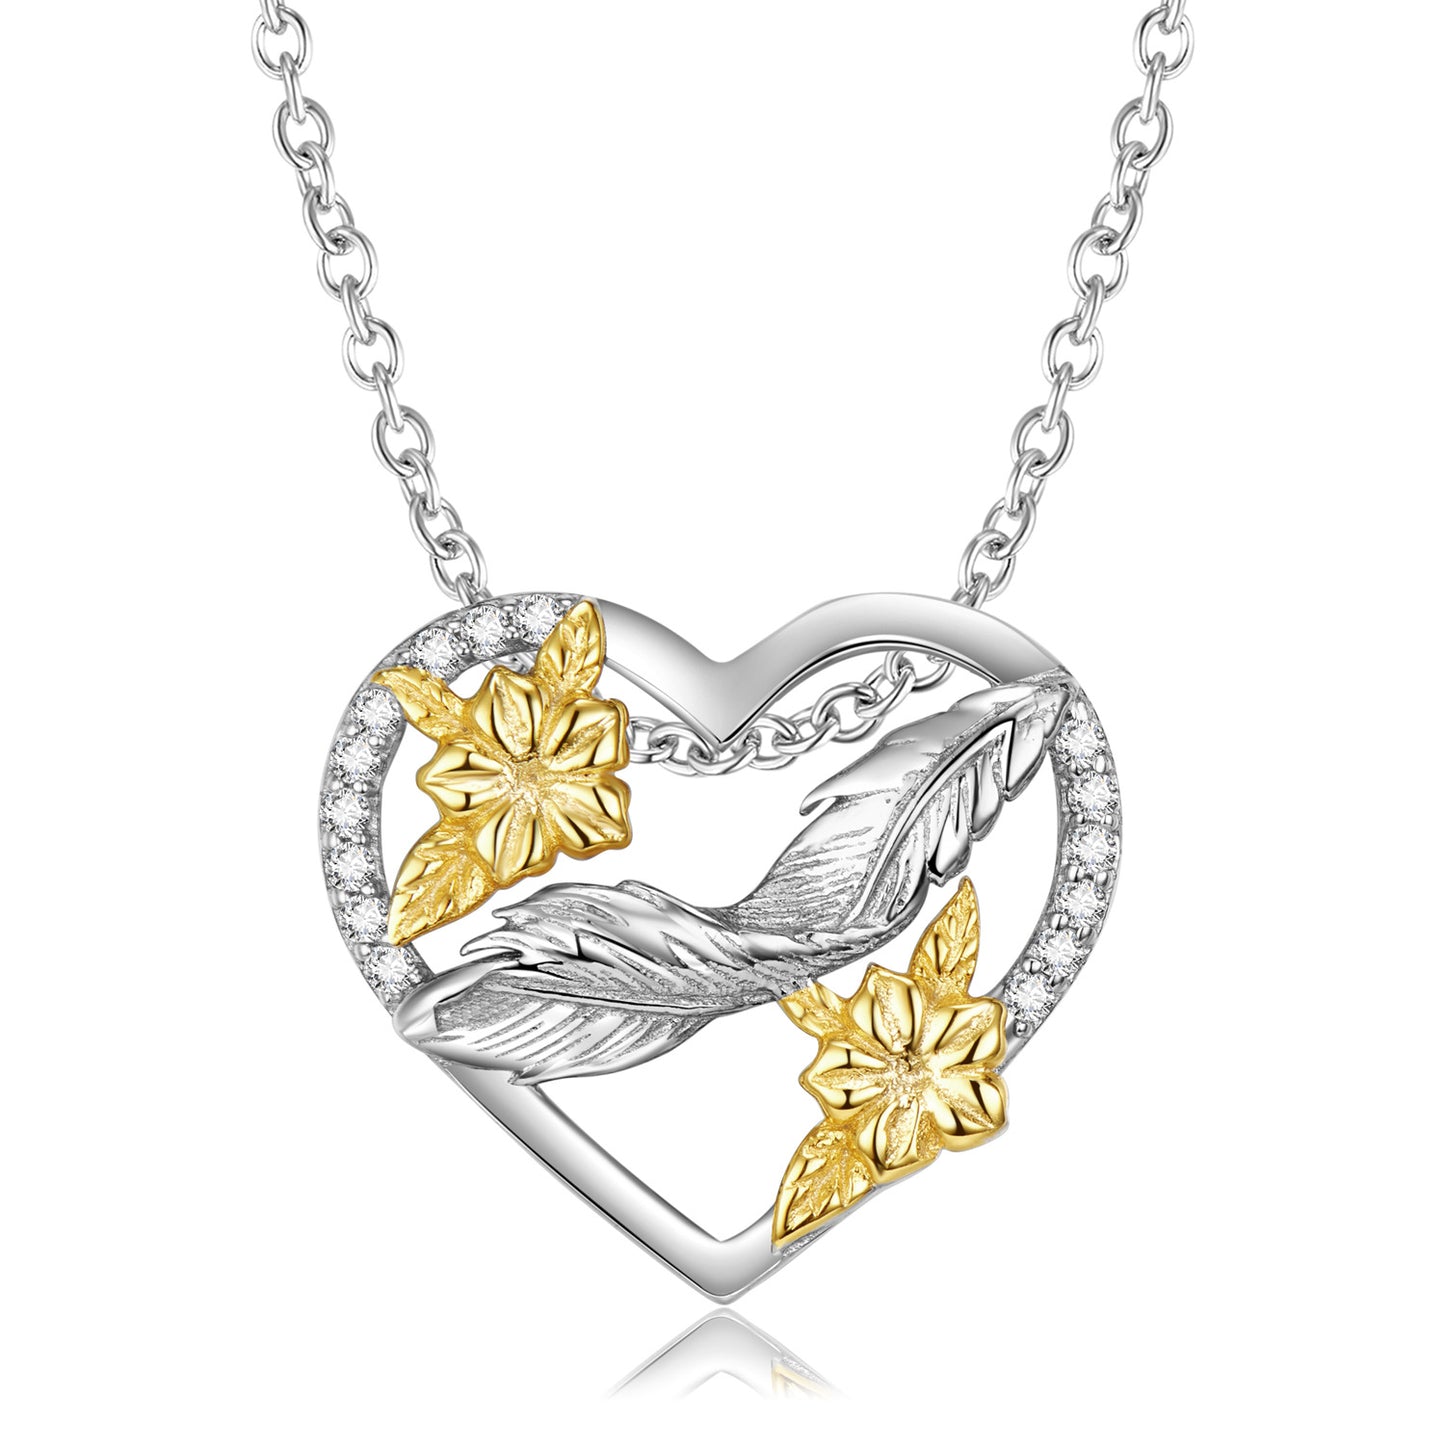 FairyLocus "Everlasting Love" Christmas Heart Cut Sterling Silver Necklace Jewelry Gift FLCYNL05 FairyLocus